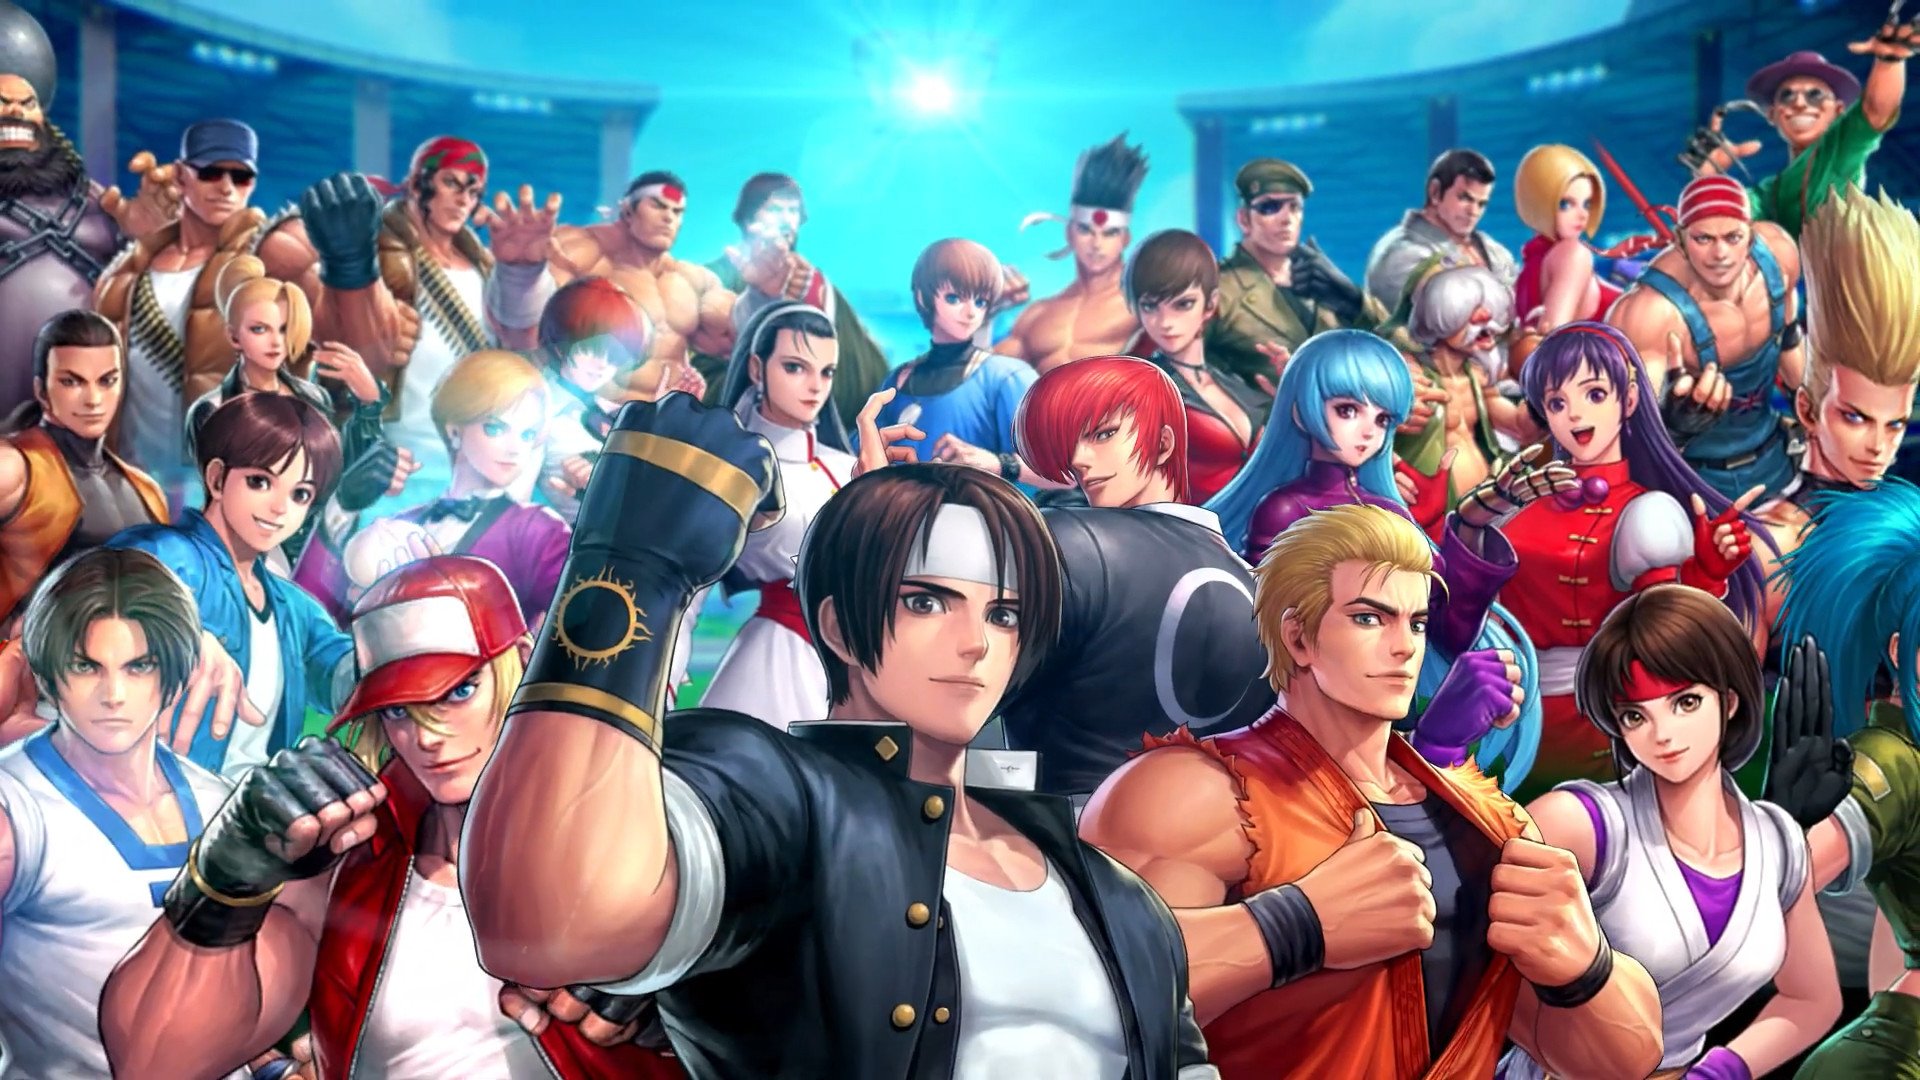 The King Of Fighters Allstar Is A Beat-Em-Up With Action RPG Elements